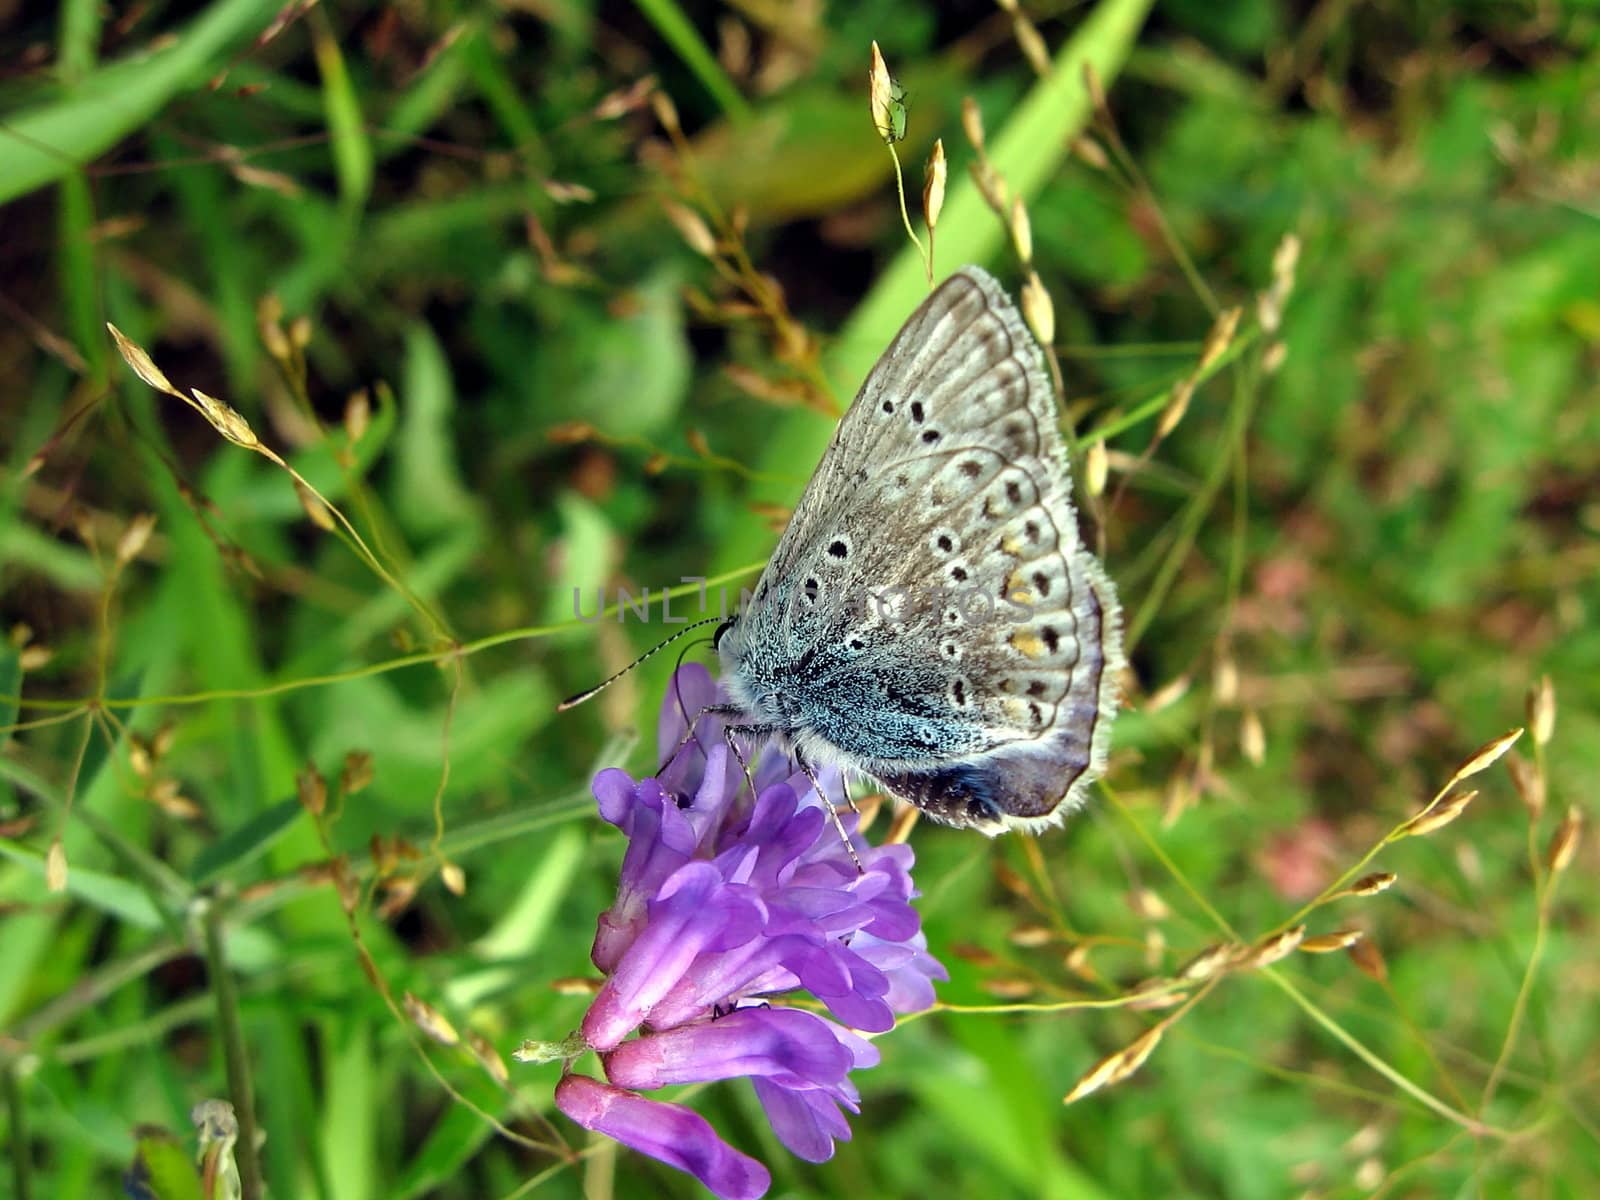 Blue butterfly by tomatto